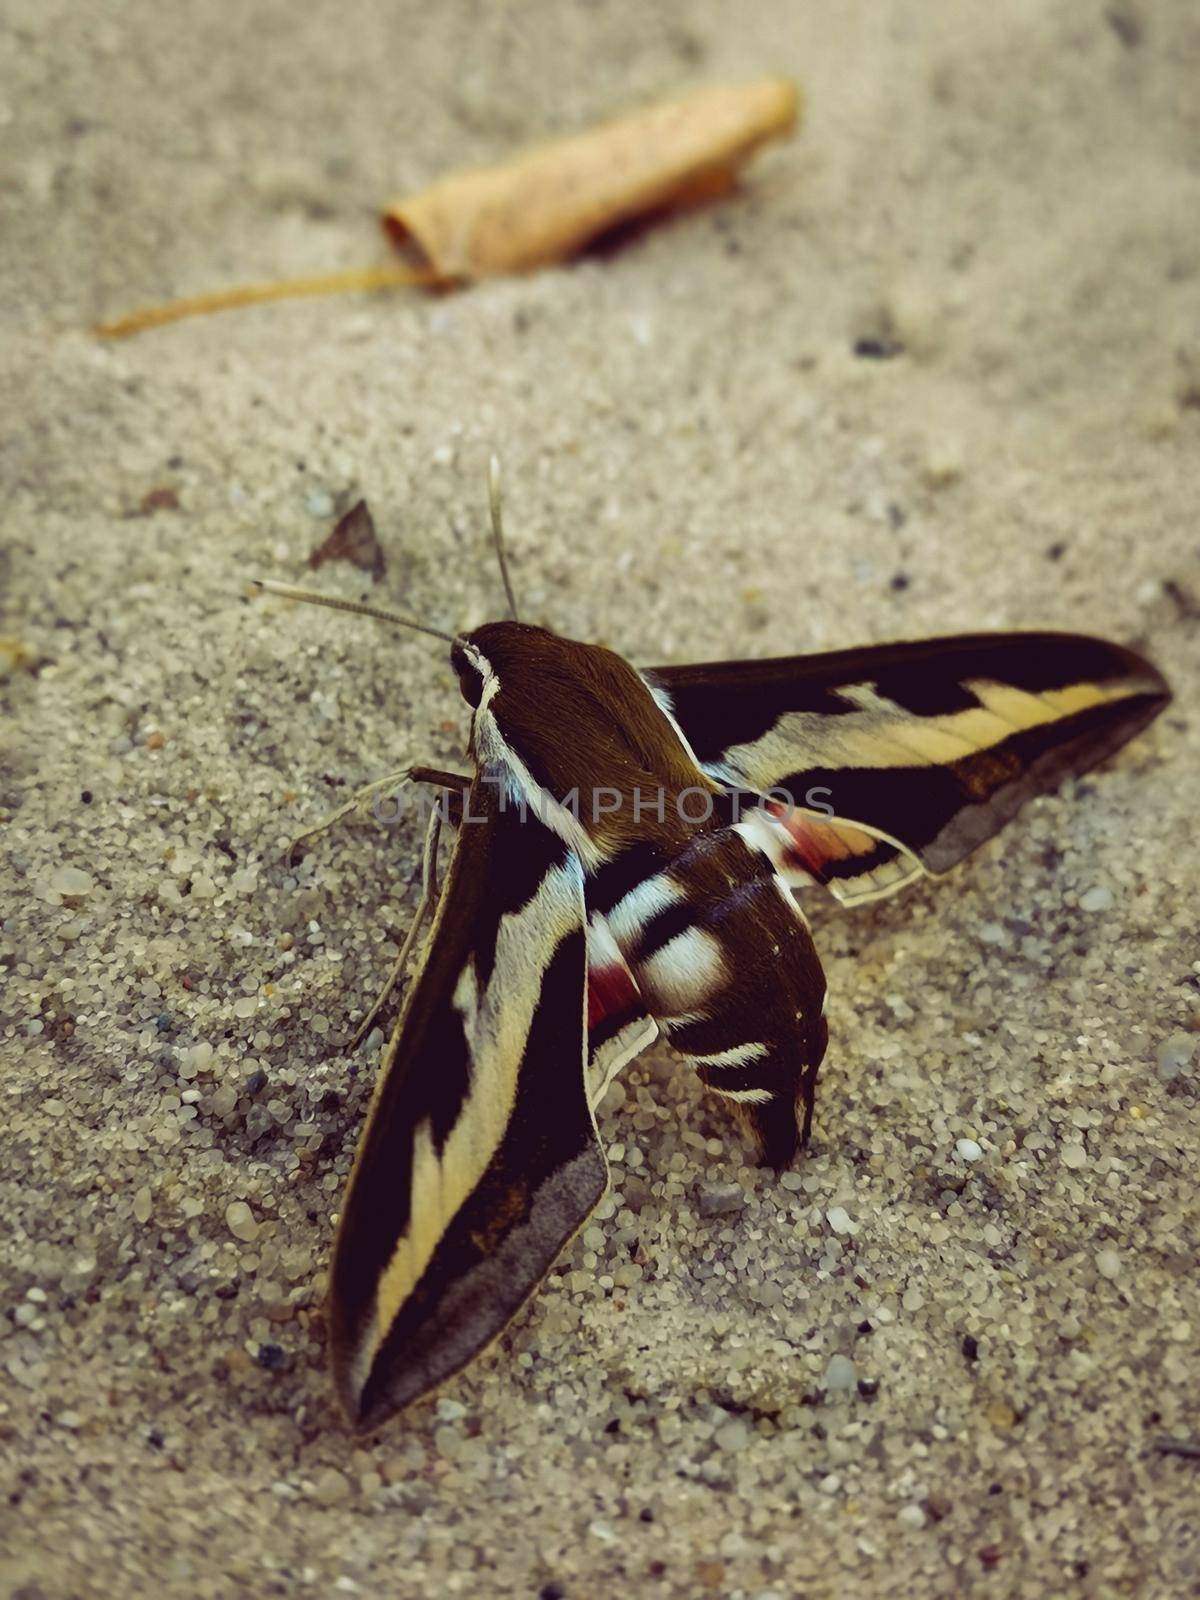 Vertical shot of a Bedstraw hawk-moth on the sand under the sunlight with a blurry background